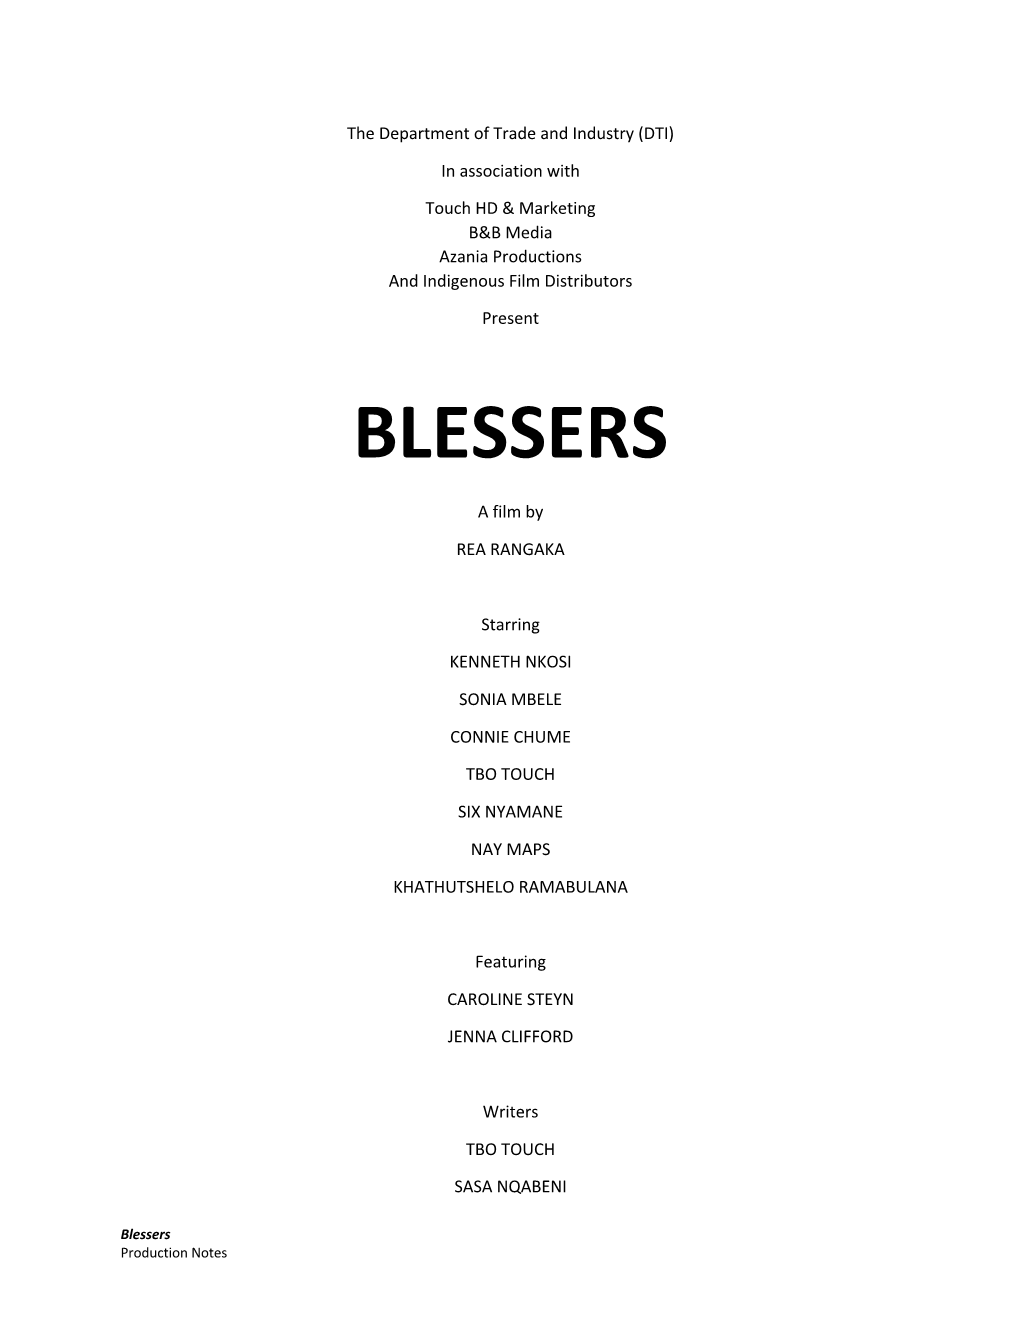 Blessers Production Notes Approved